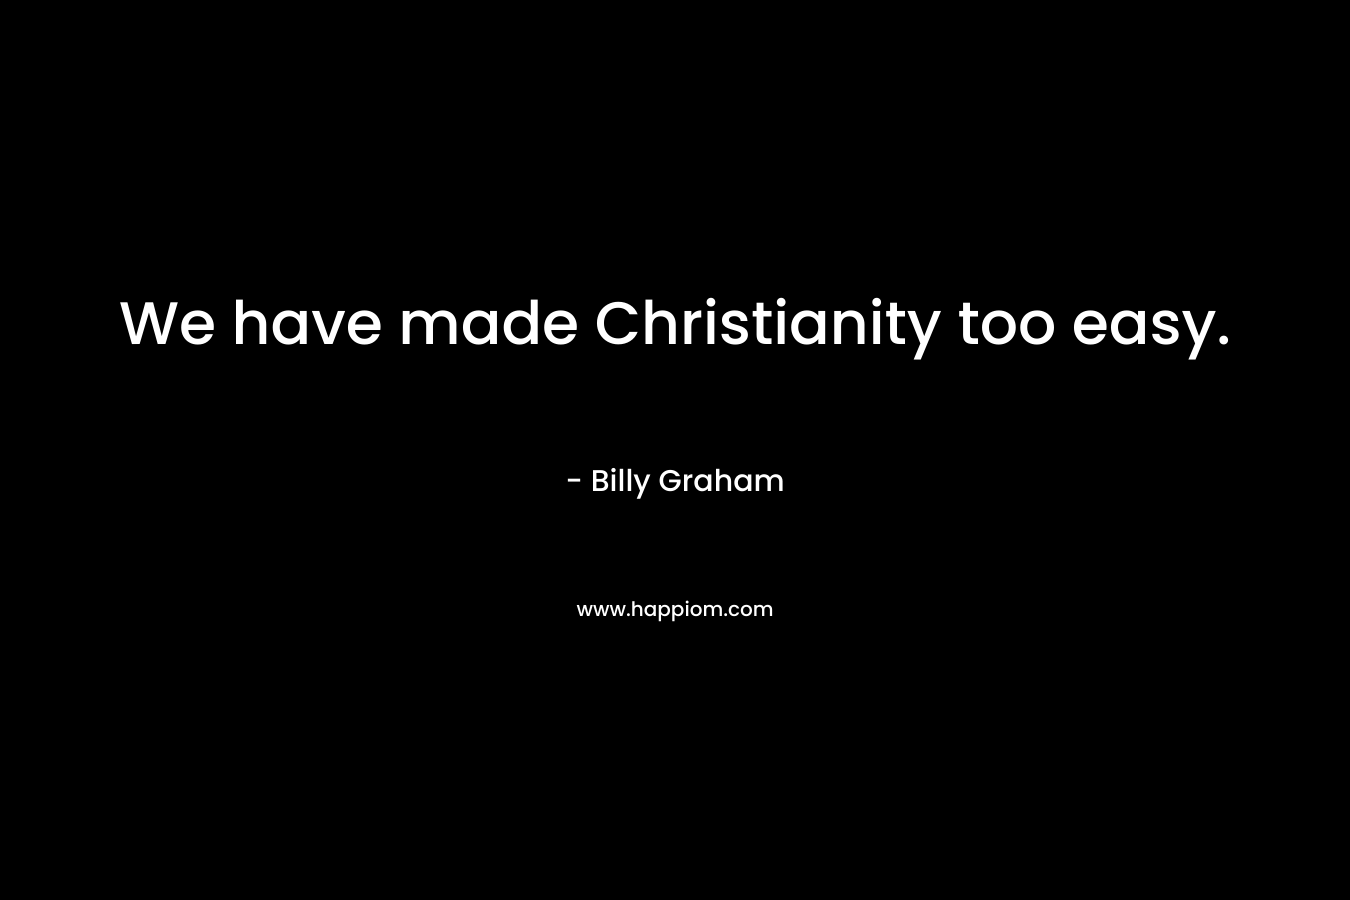 We have made Christianity too easy.